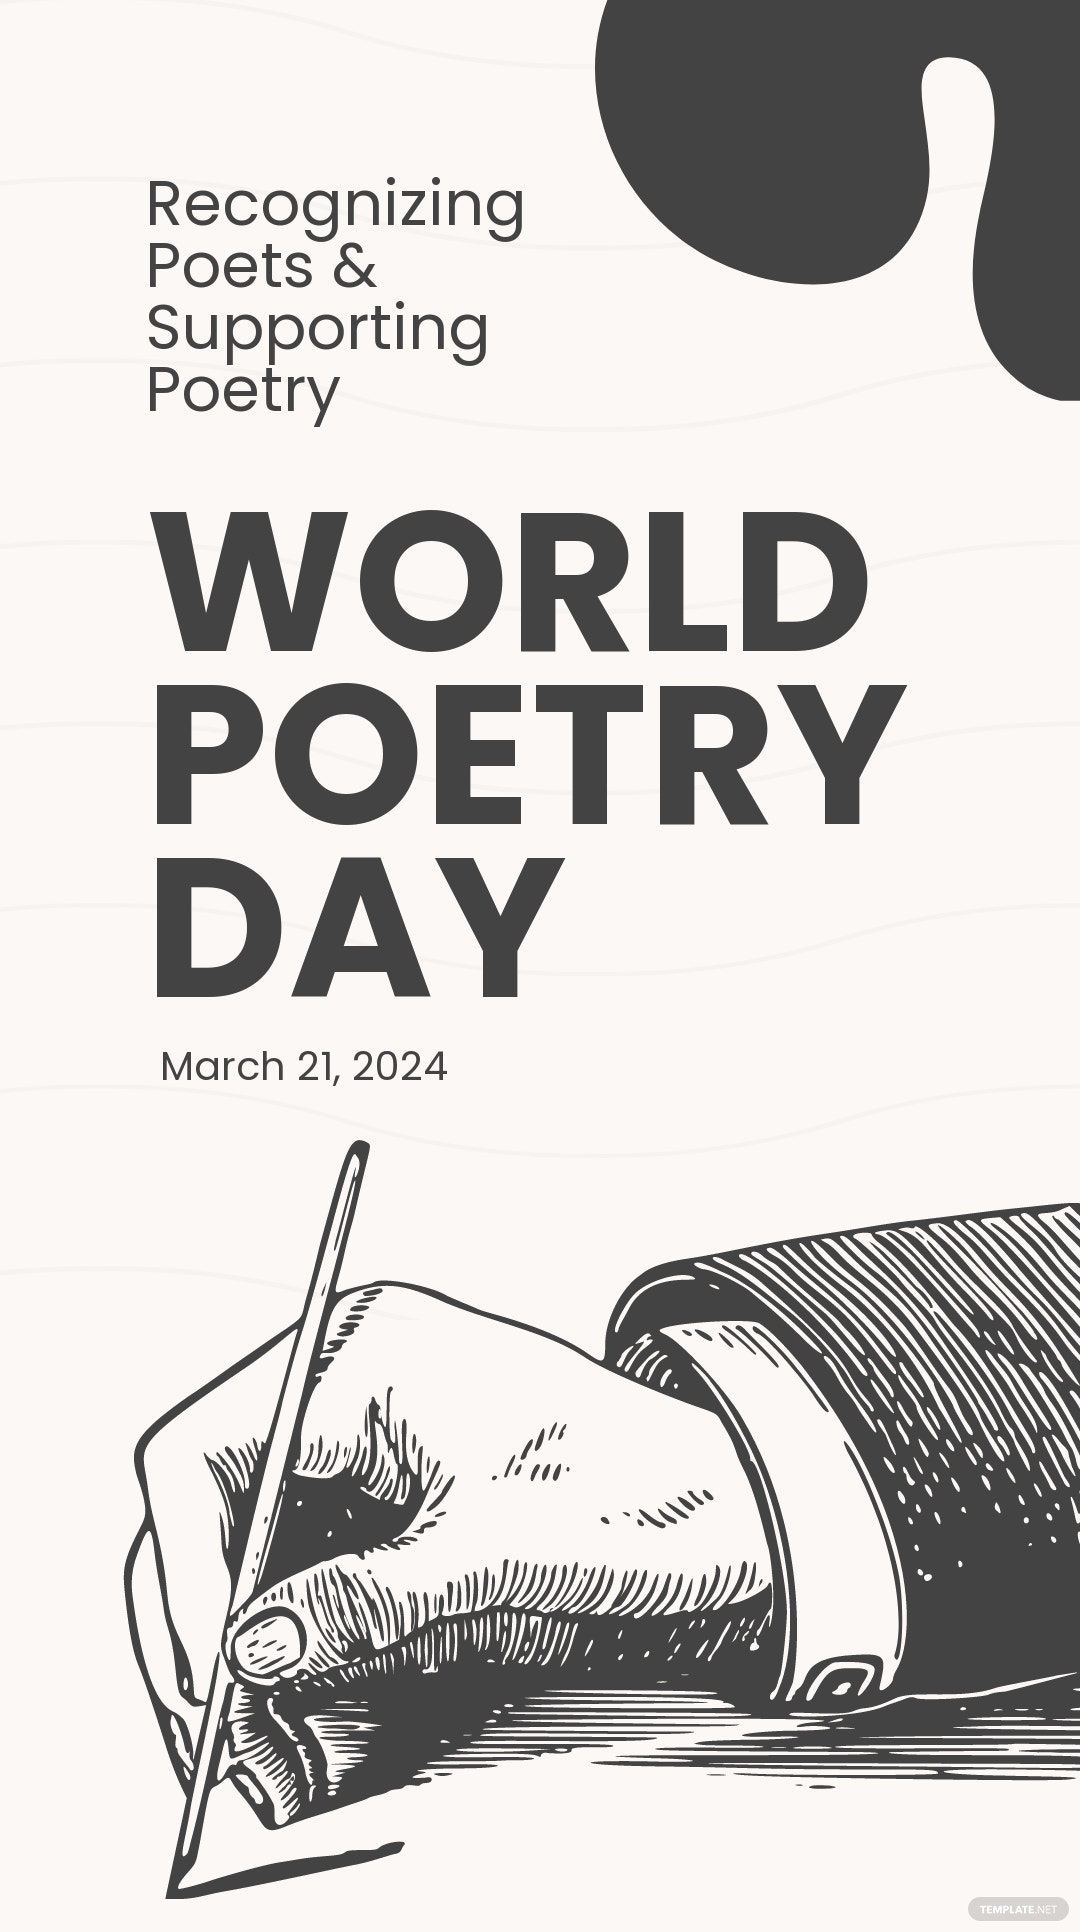 World Poetry Day When Is World Poetry Day Meaning, Dates, Purpose